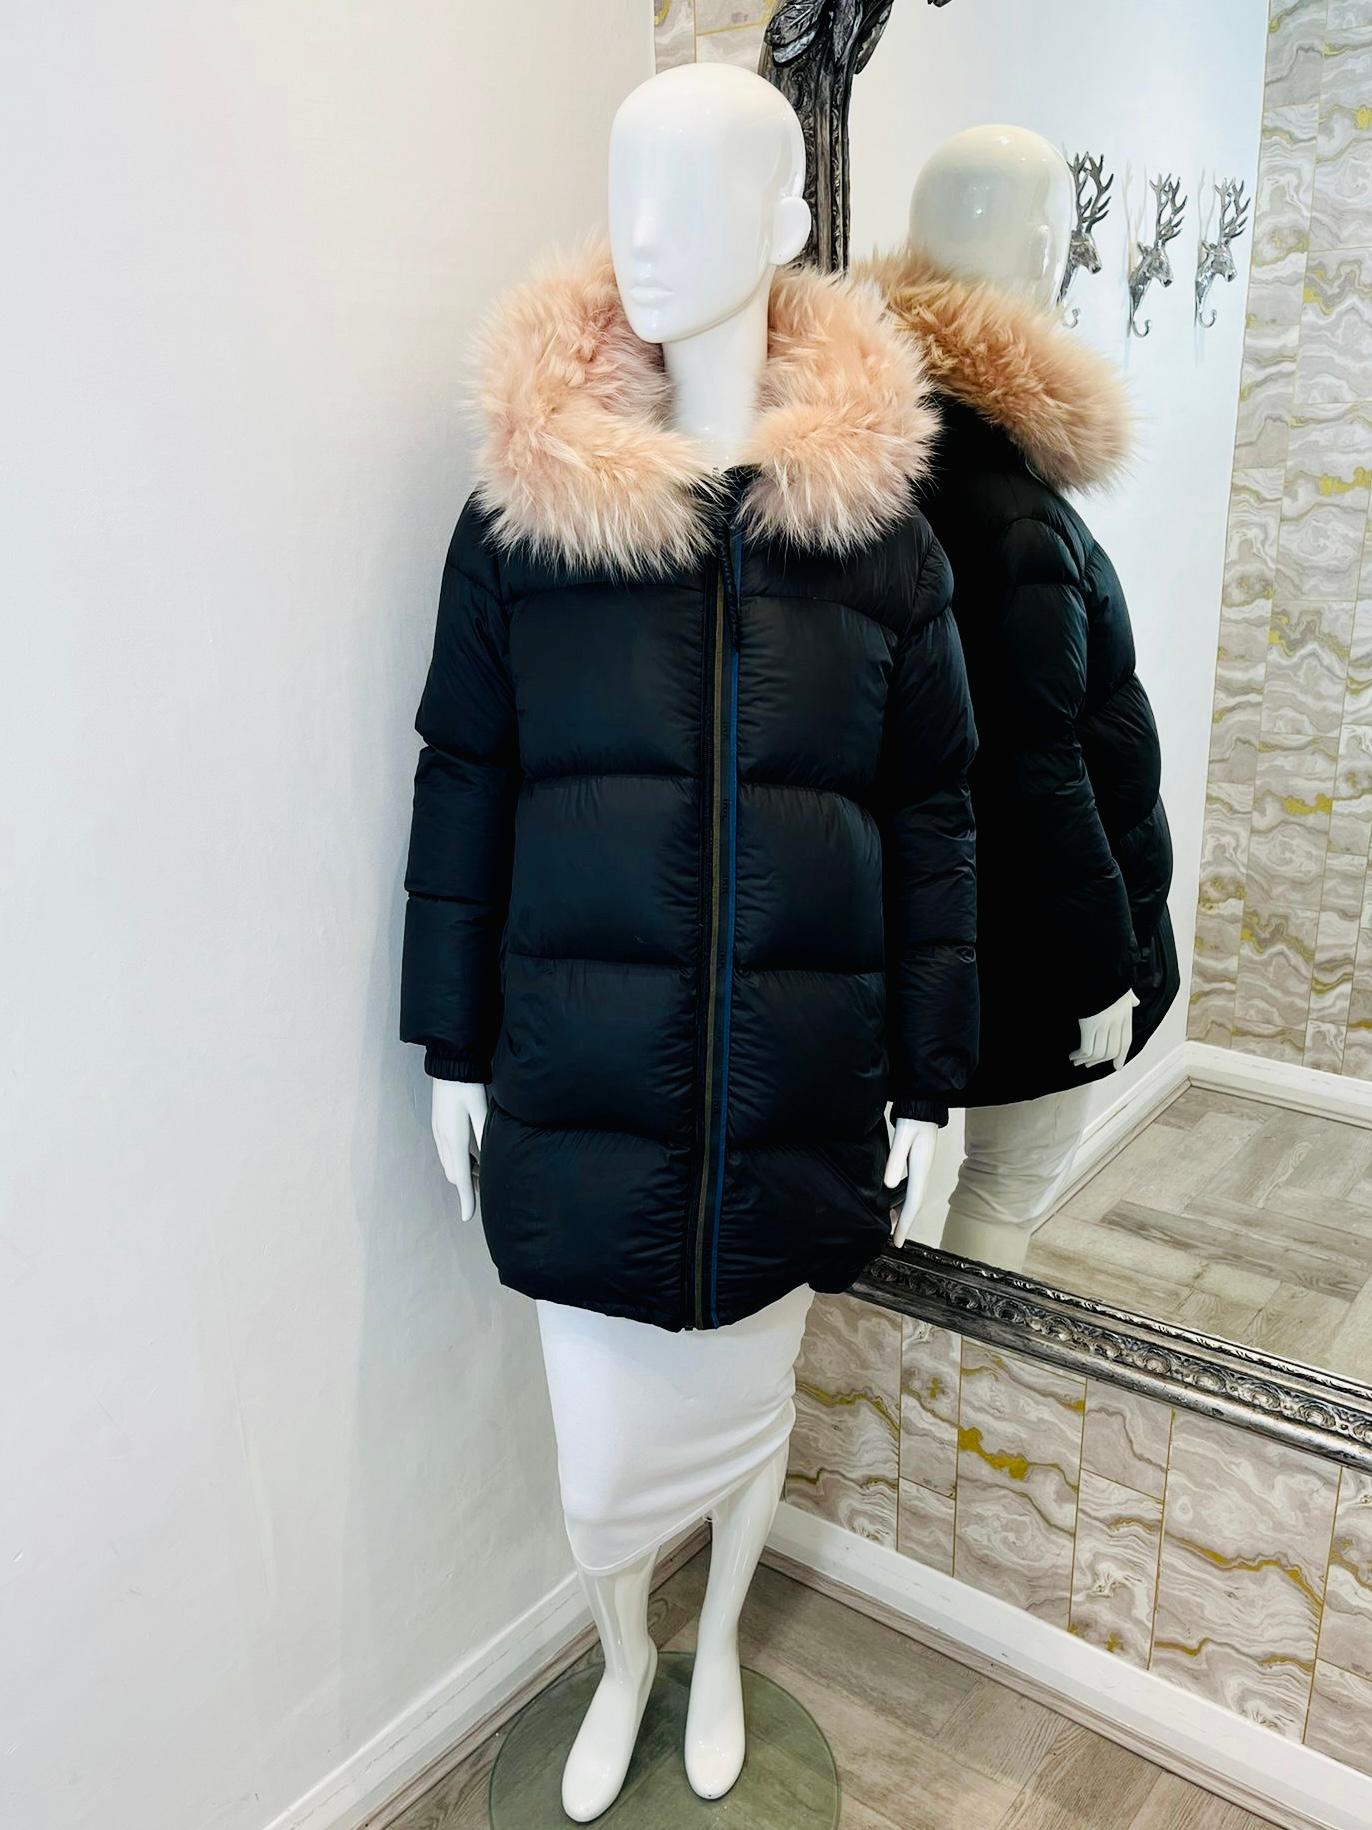 Mr & Mrs Italy Puffer Coat With Fur Hood

Black goose down puffer with zipper closure and over sized 

baby pink real fur hood.

Size - M

Condition - Very Good

Composition - Goose Down, Real Fur, Polyester

Comes With - Branded Suit Cover